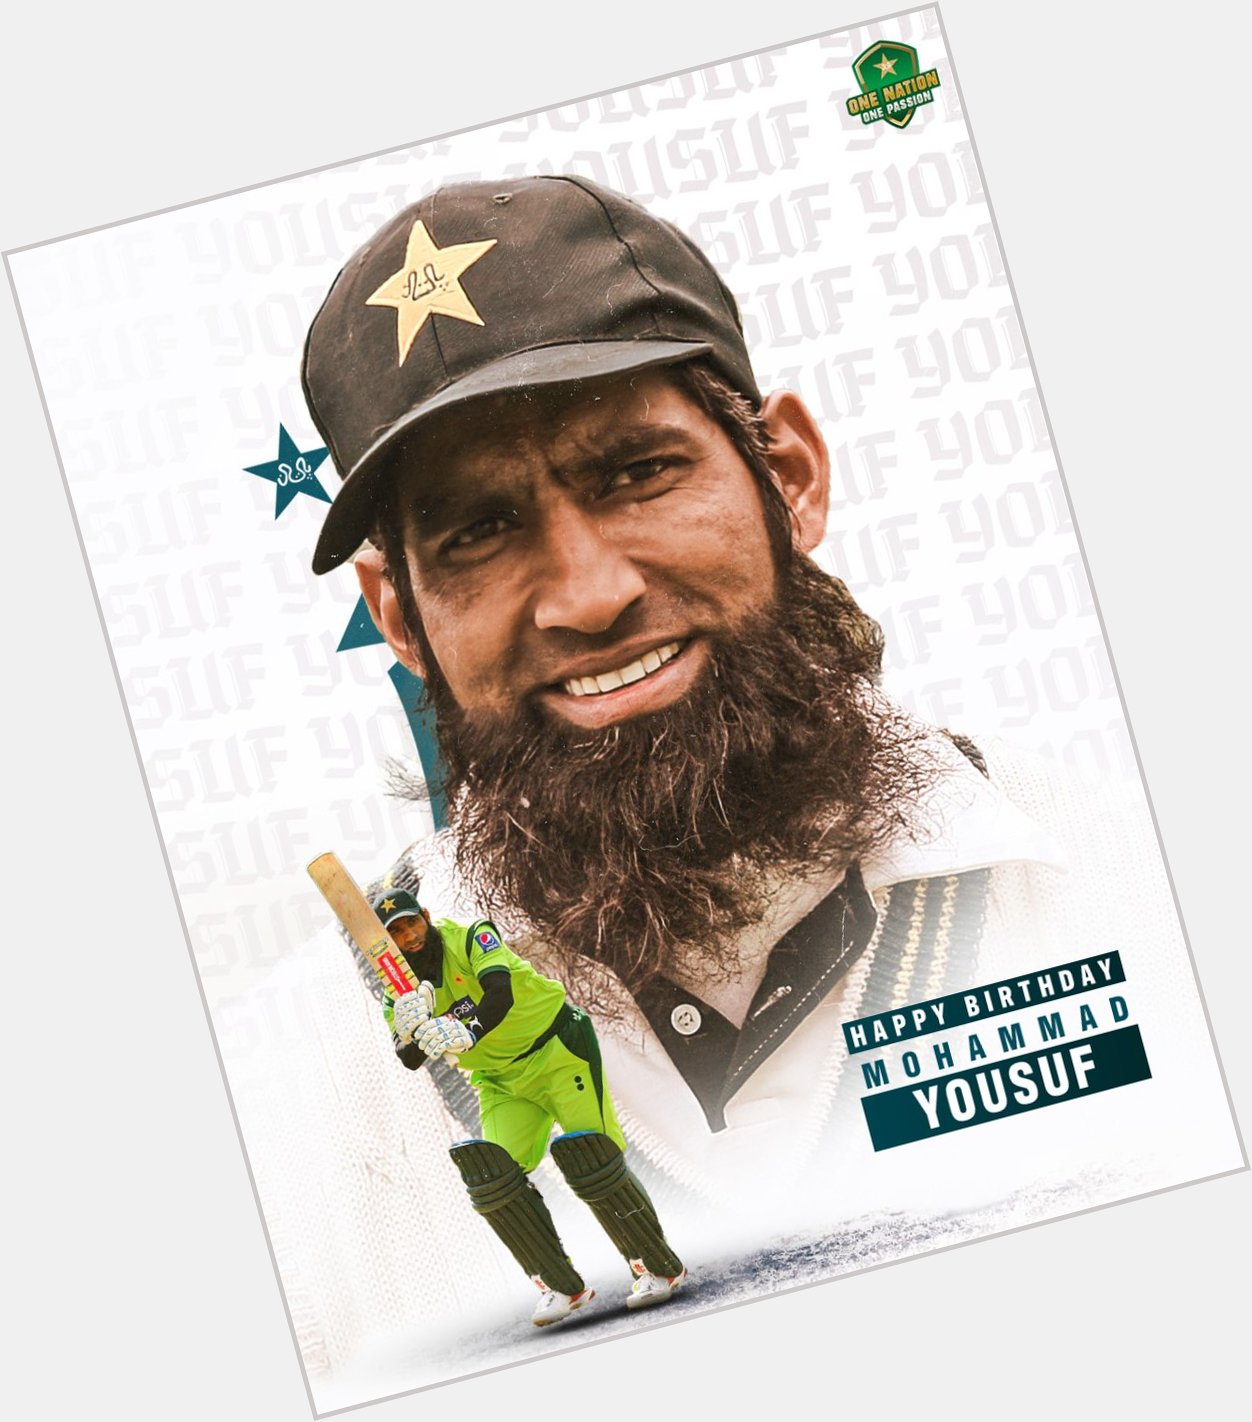 Synonym of class, Mohammad Yousuf Happy Birthday Champ   